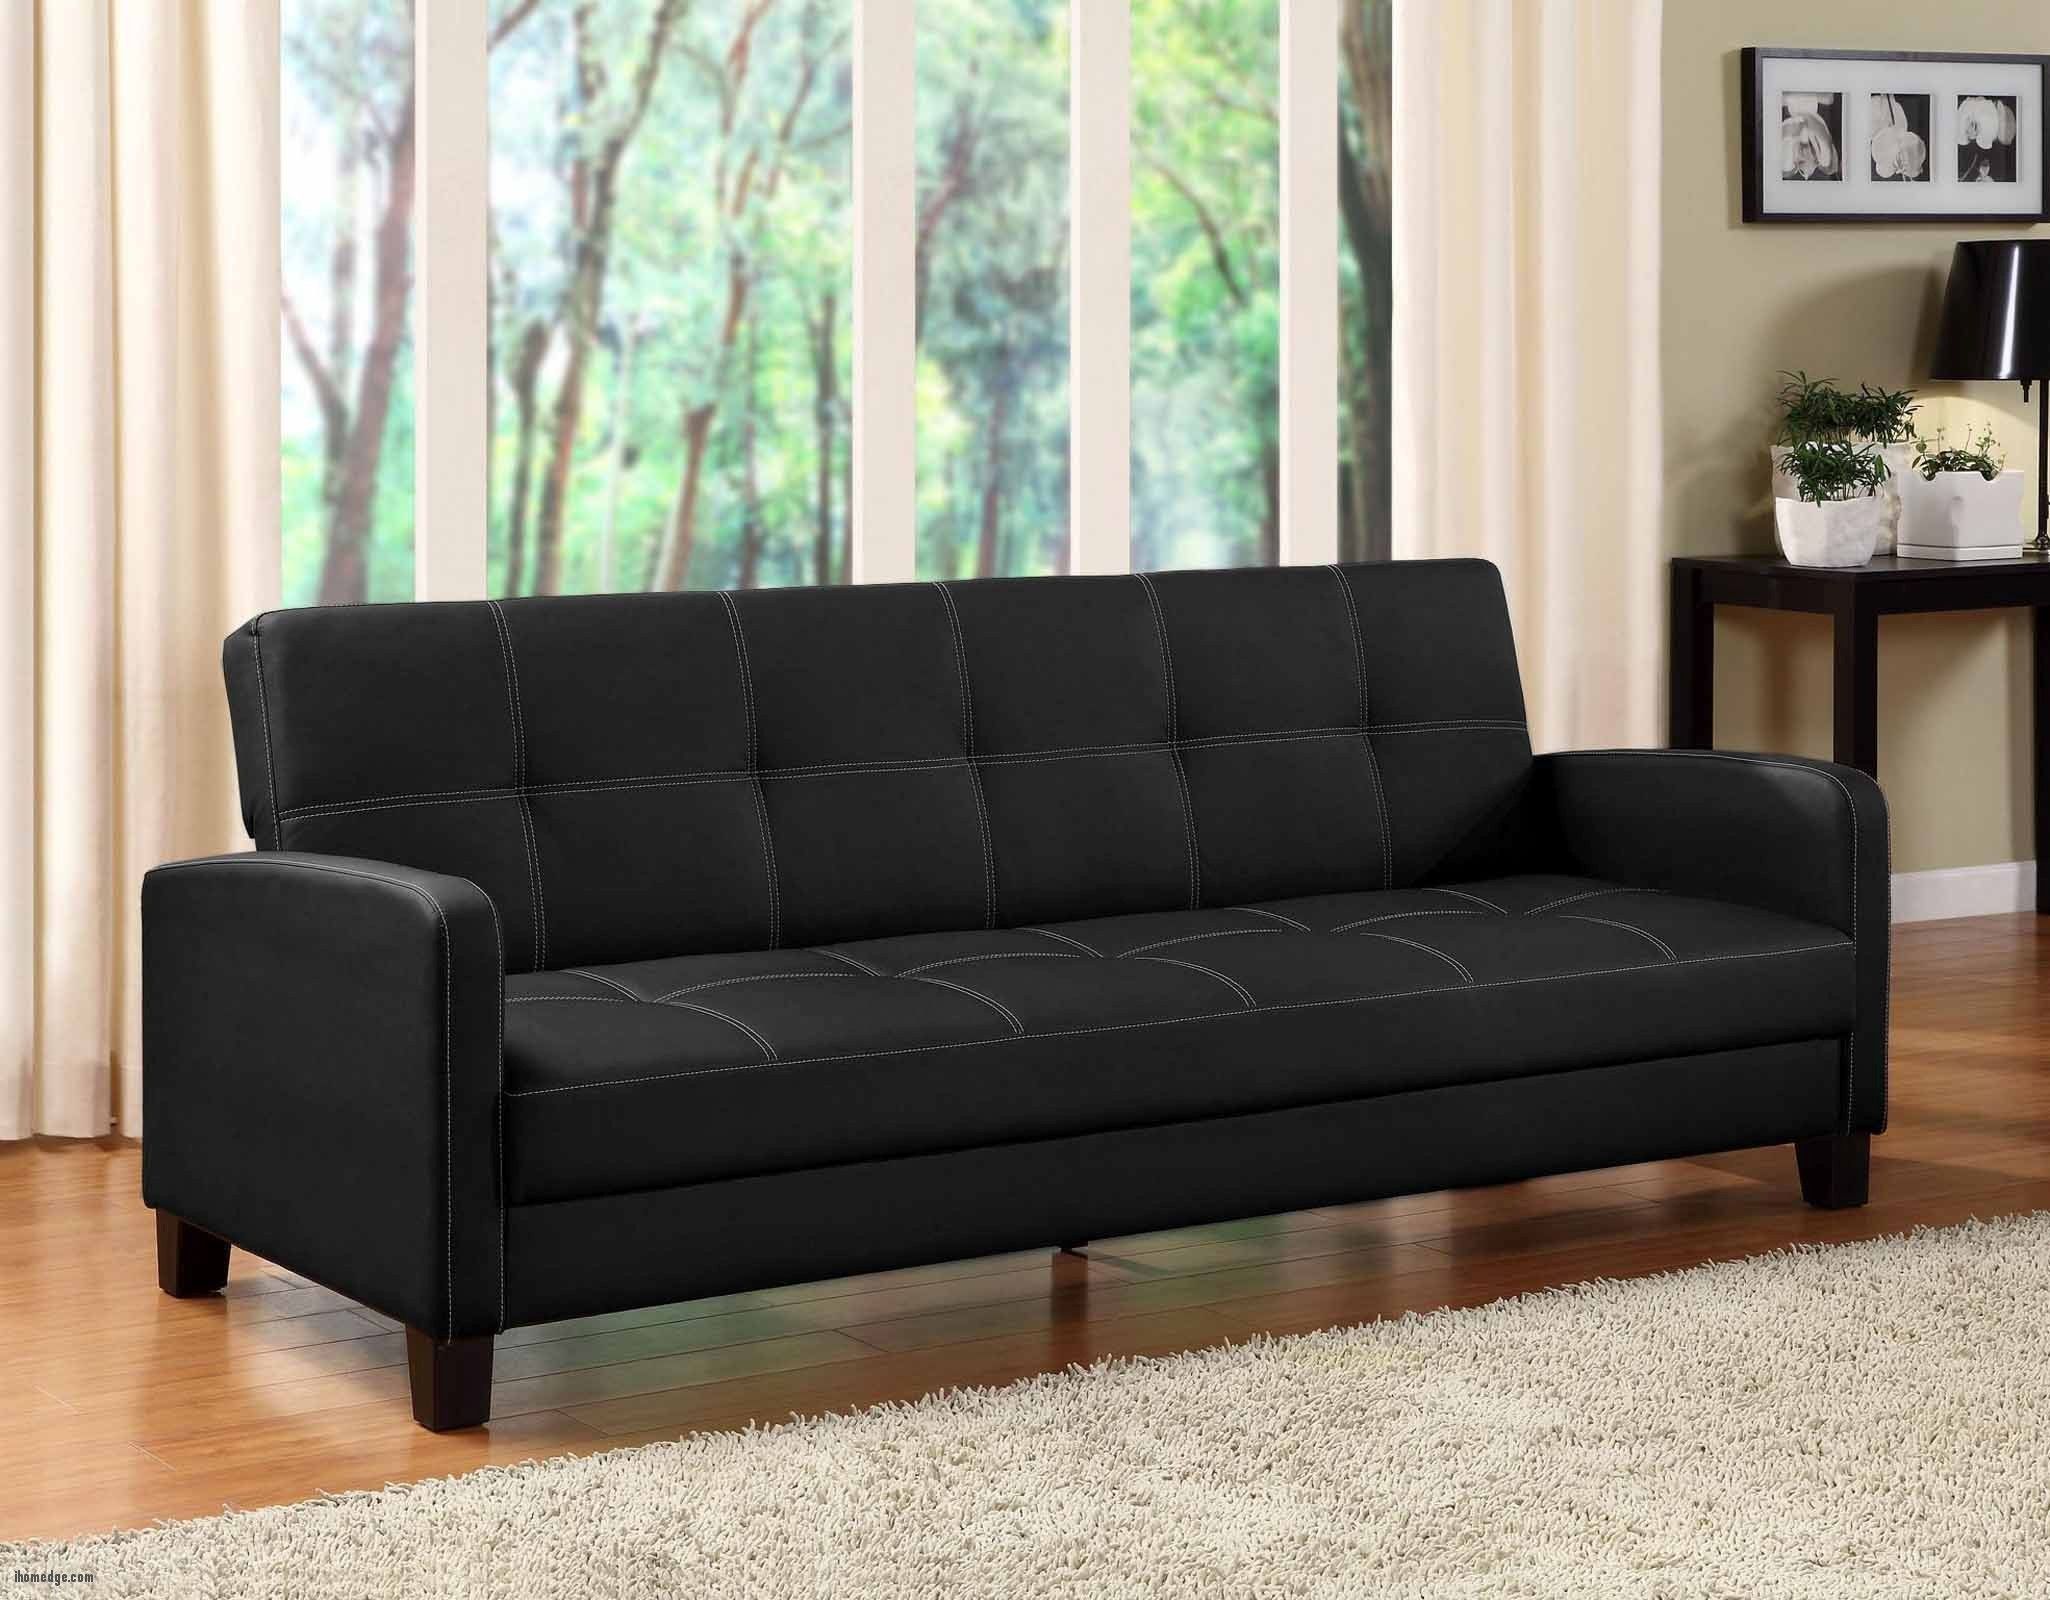 Queen Size Convertible Sofa Bed – Ideas On Foter With Regard To Queen Size Convertible Sofa Beds (View 8 of 20)